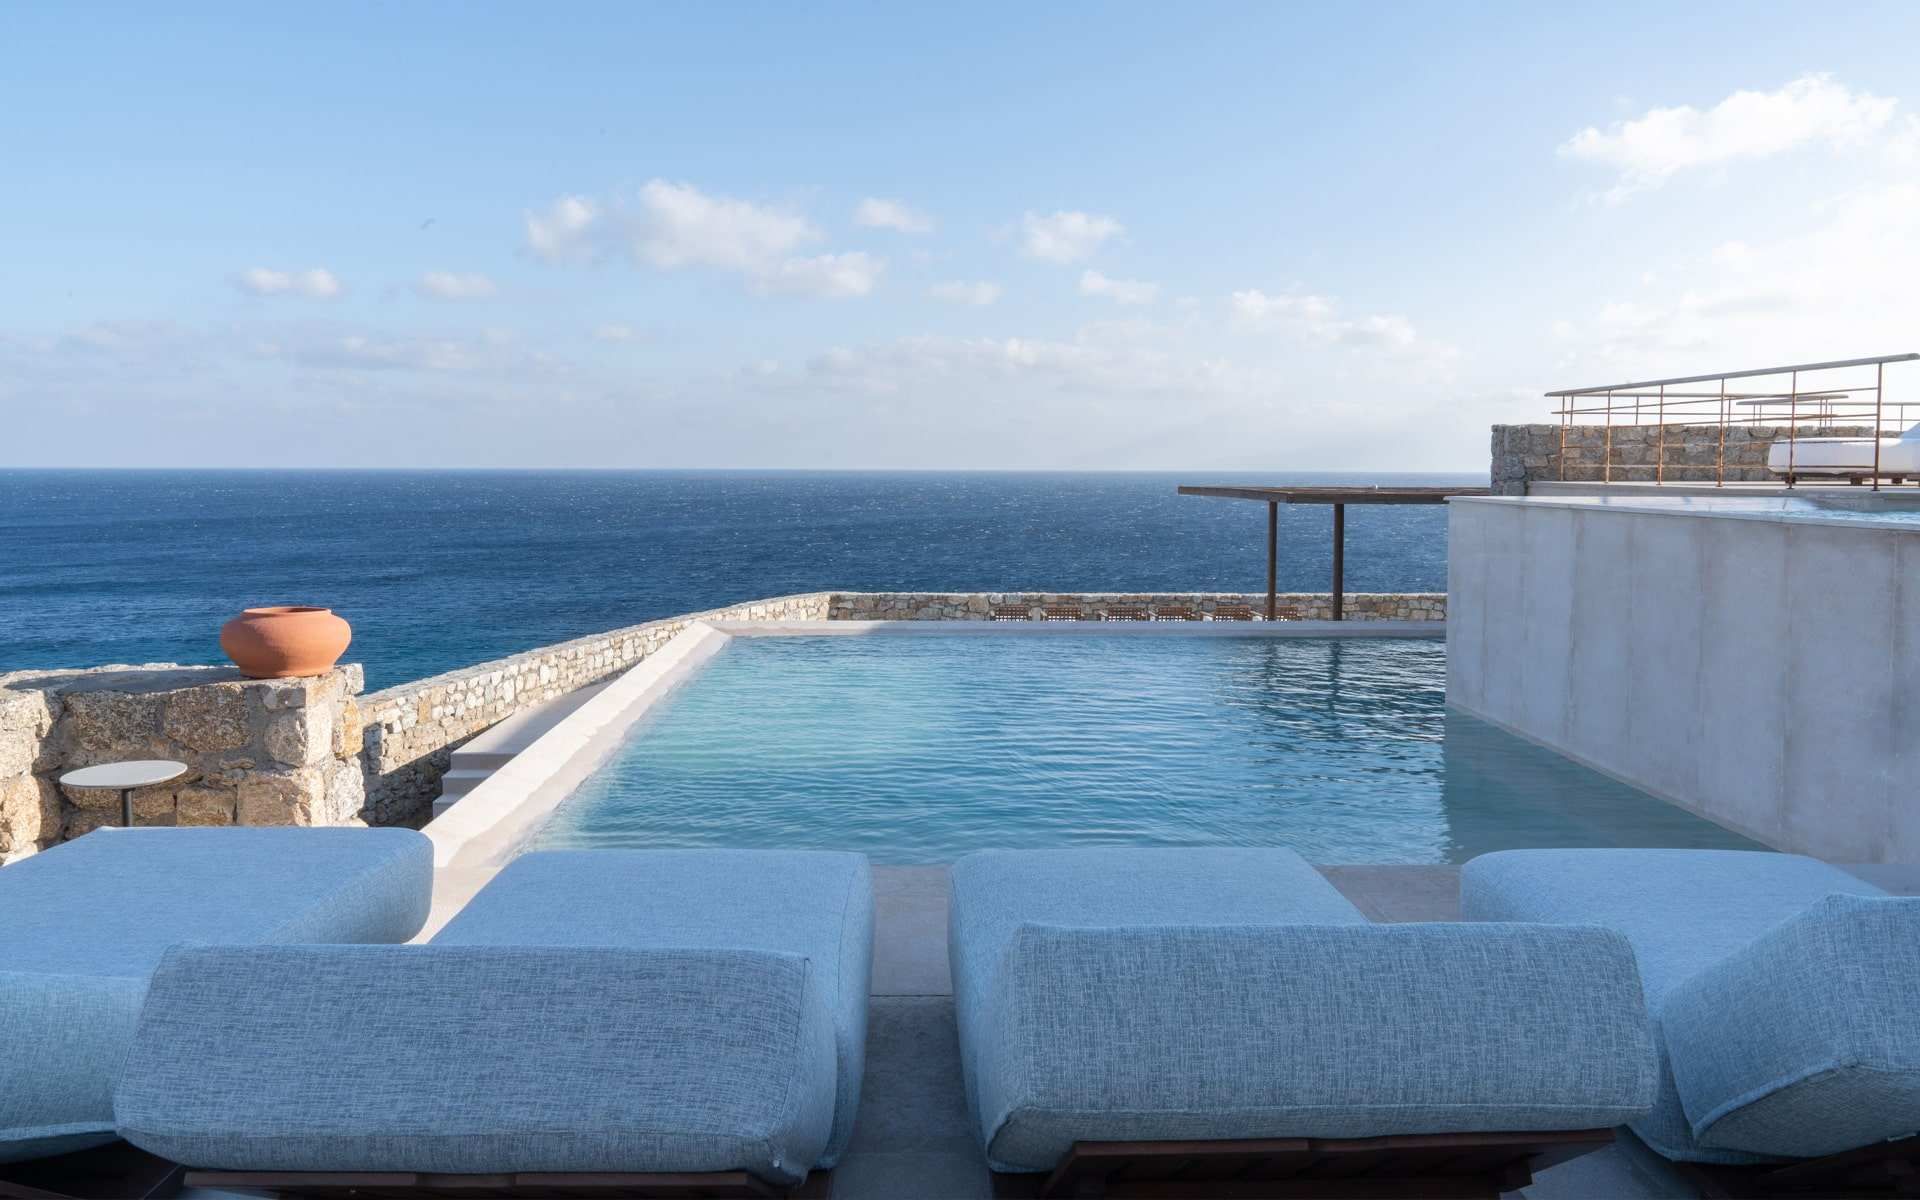 there is a swimming pool with a view of the ocean